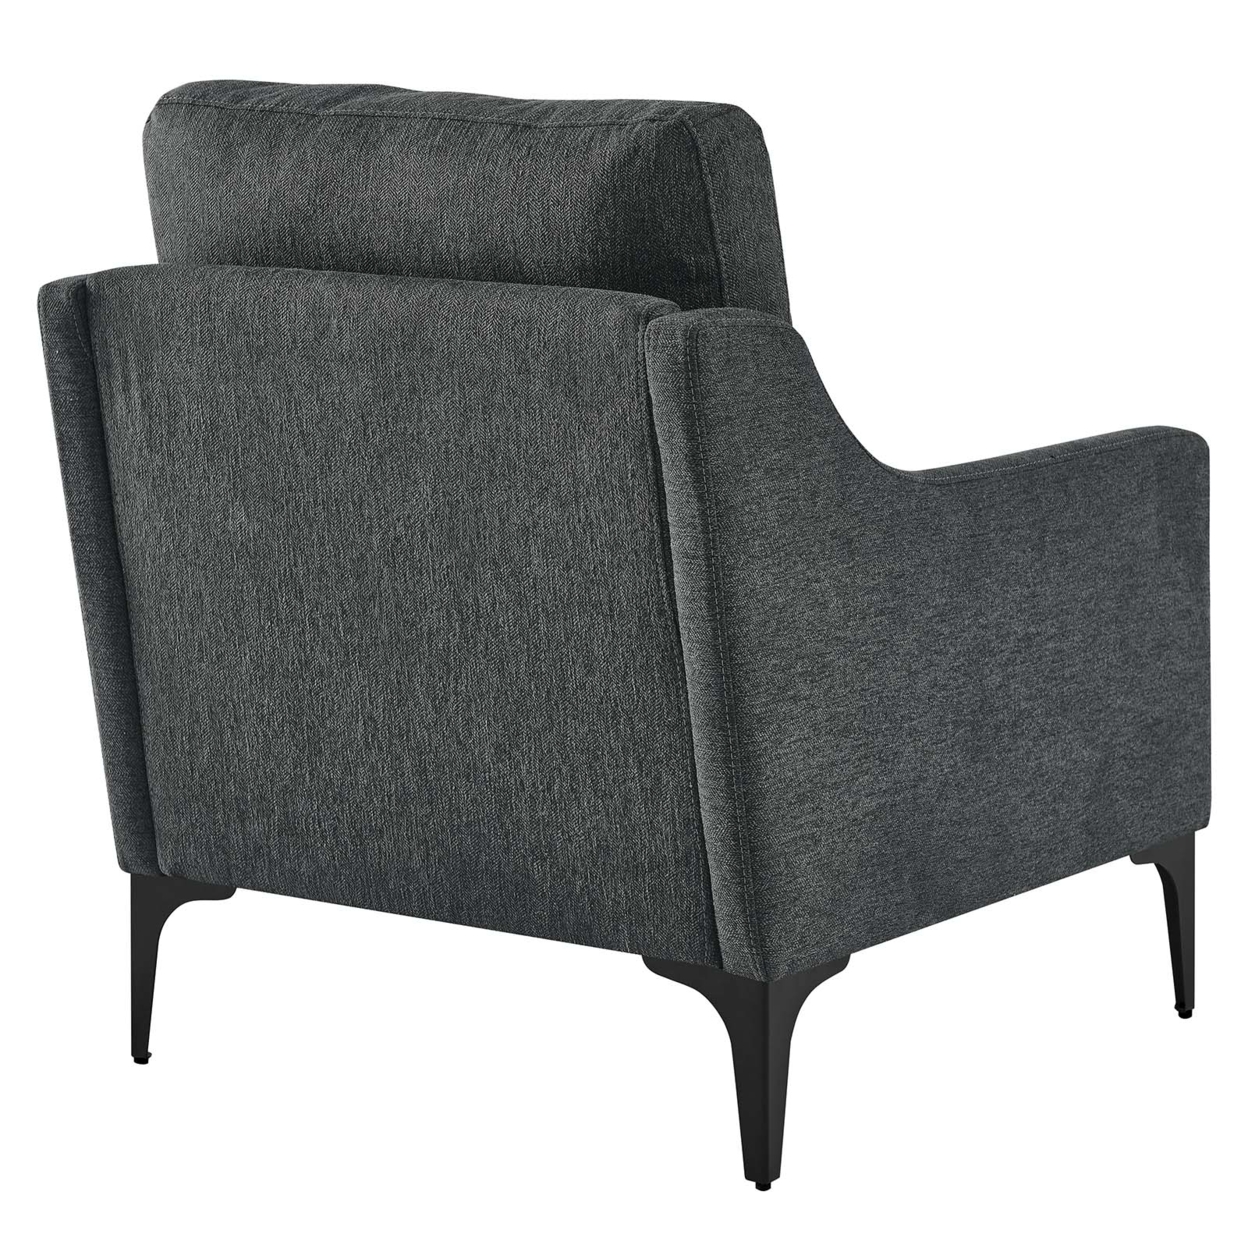 Corland Upholstered Fabric Armchair, Charcoal